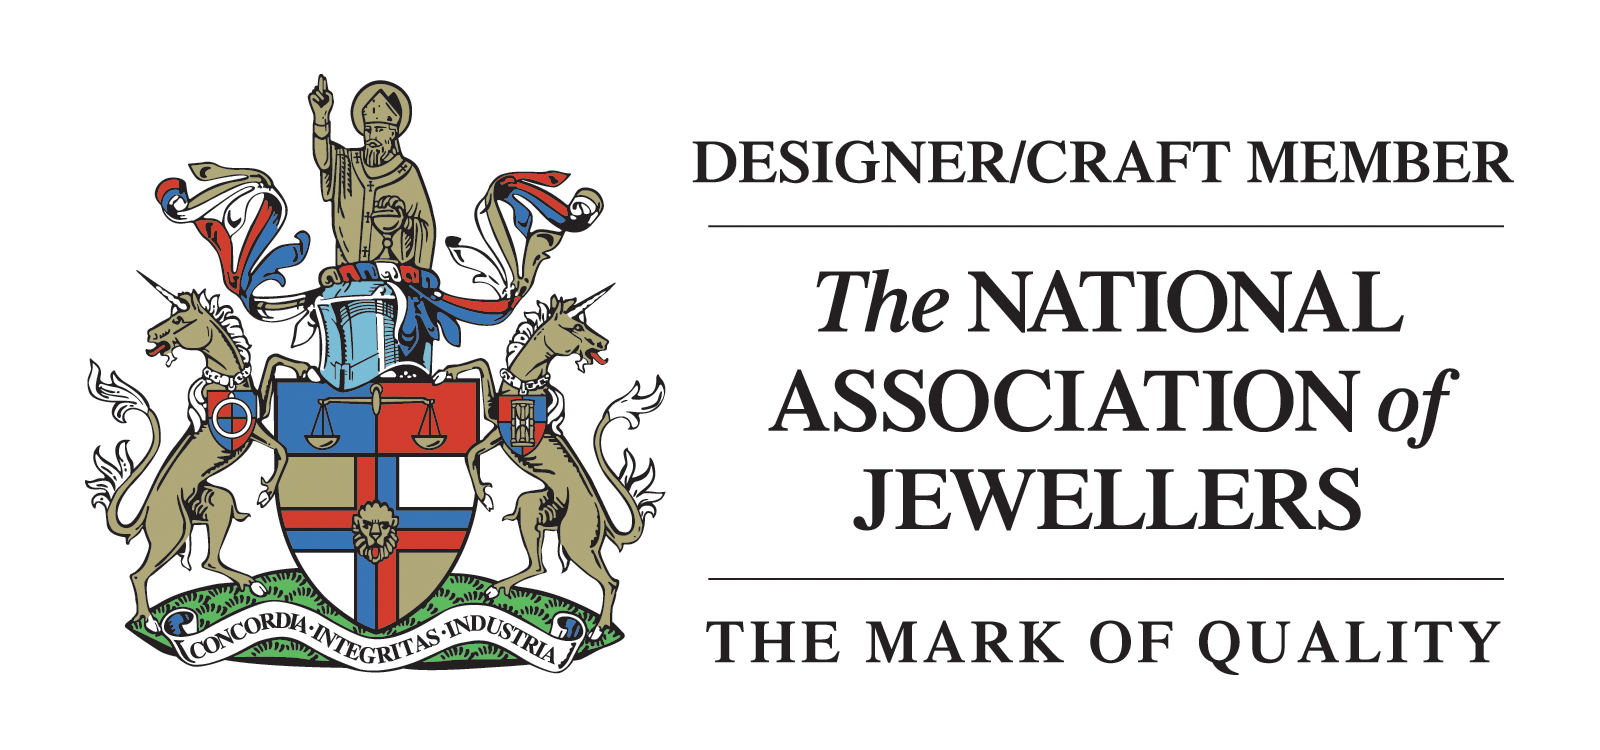 Designer/craft member of the National Association of Jewellers. The mark of quality.